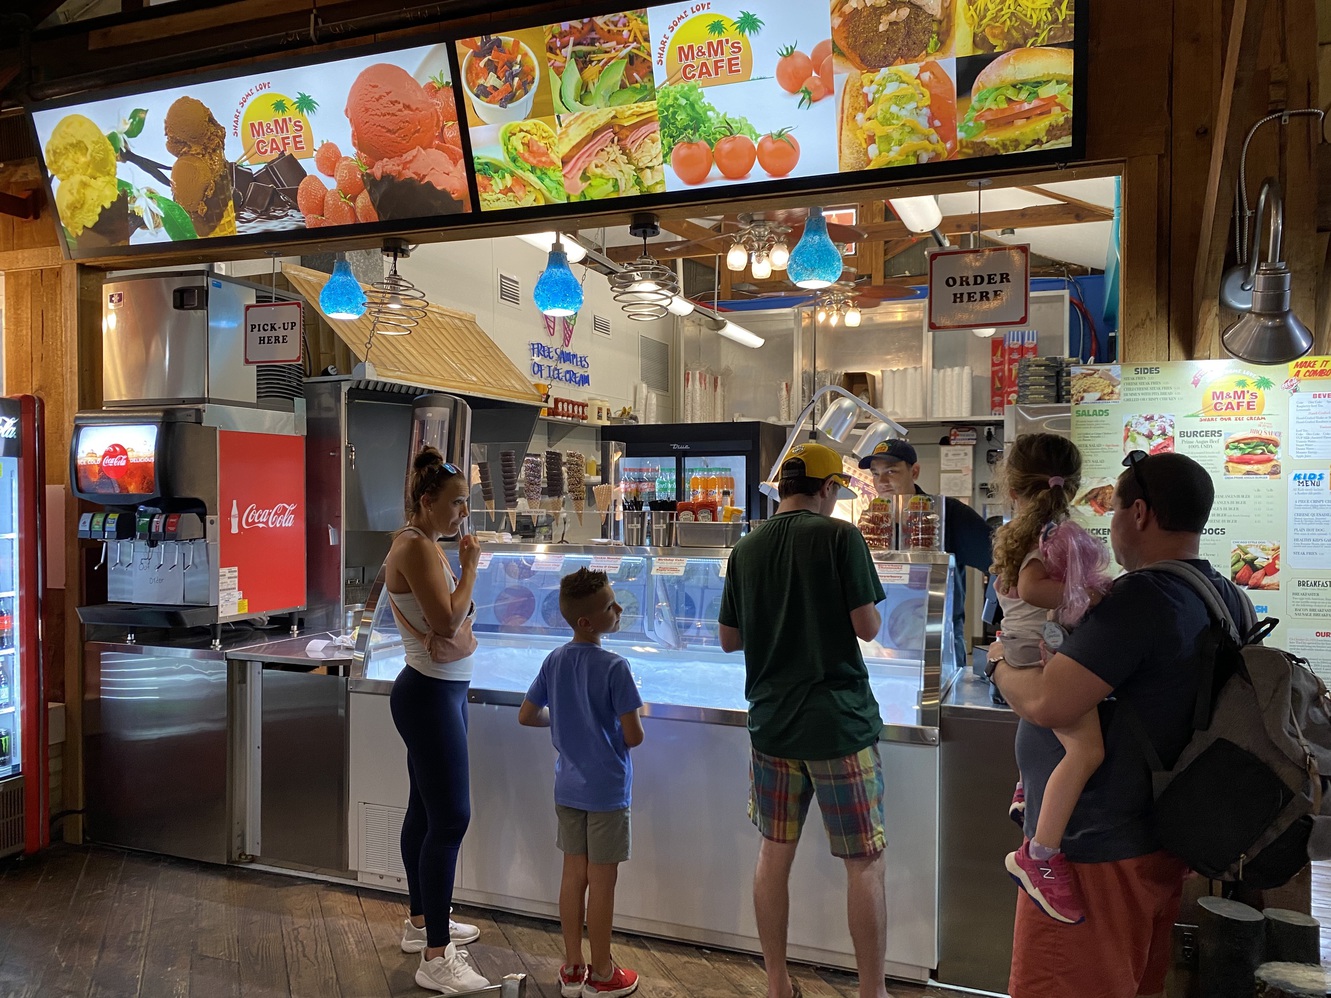 People get free samples of ice cream at M&M's Cafe.